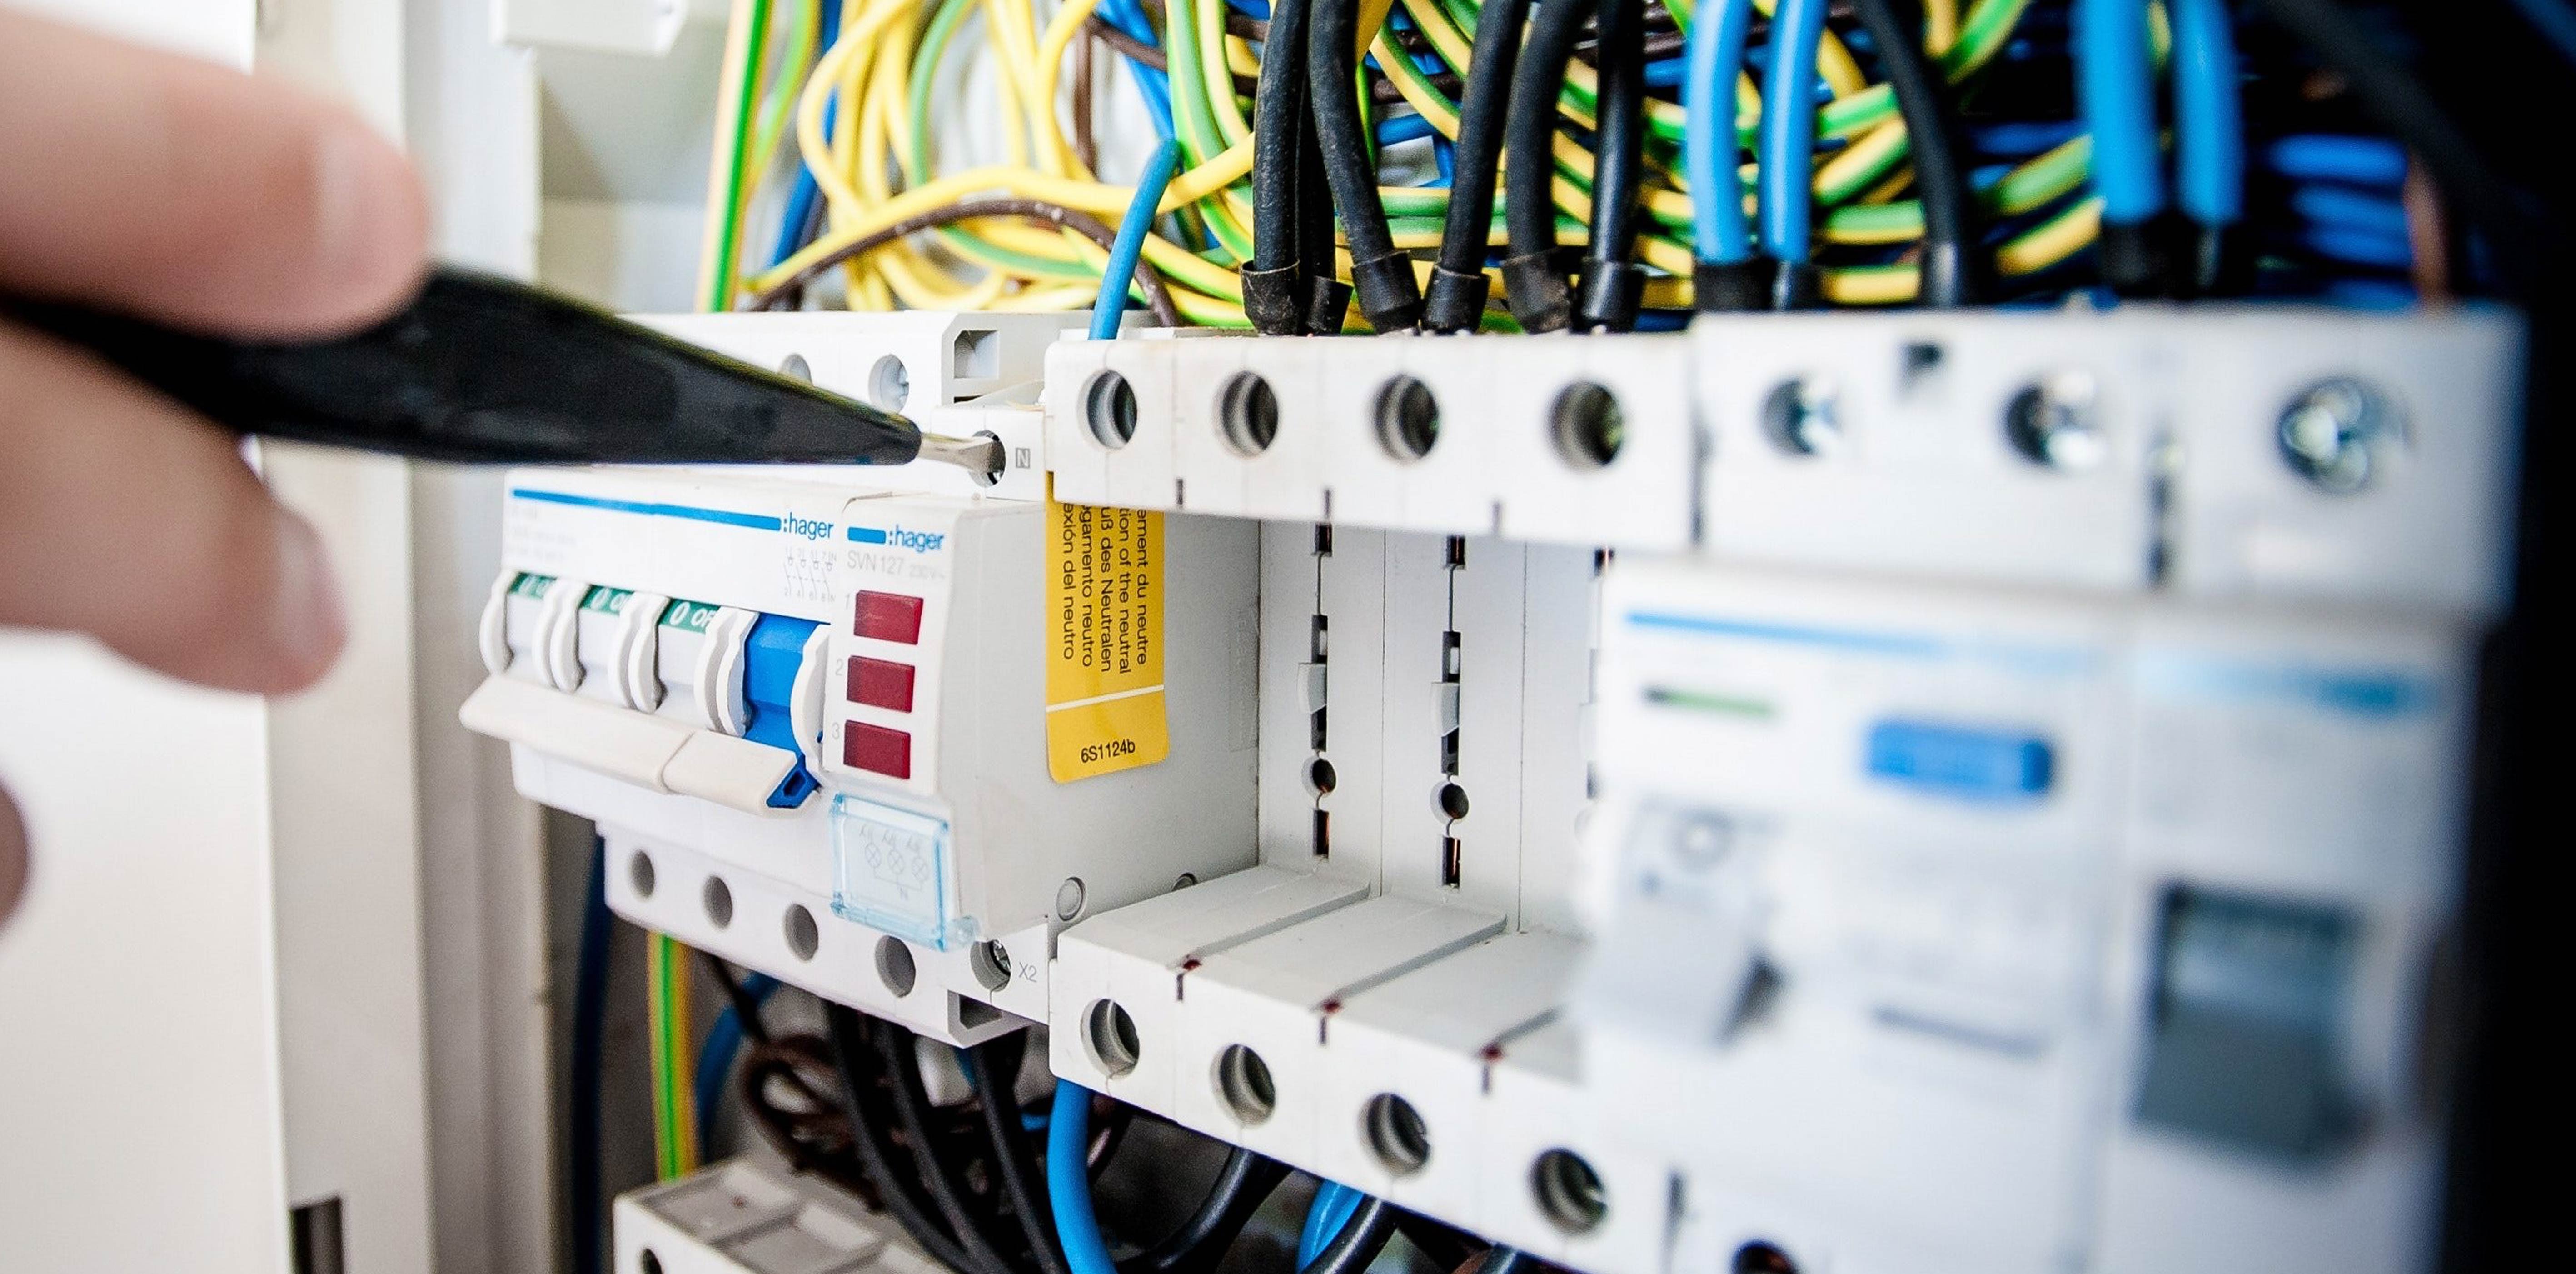 Electrical inspection & testing (EICR)